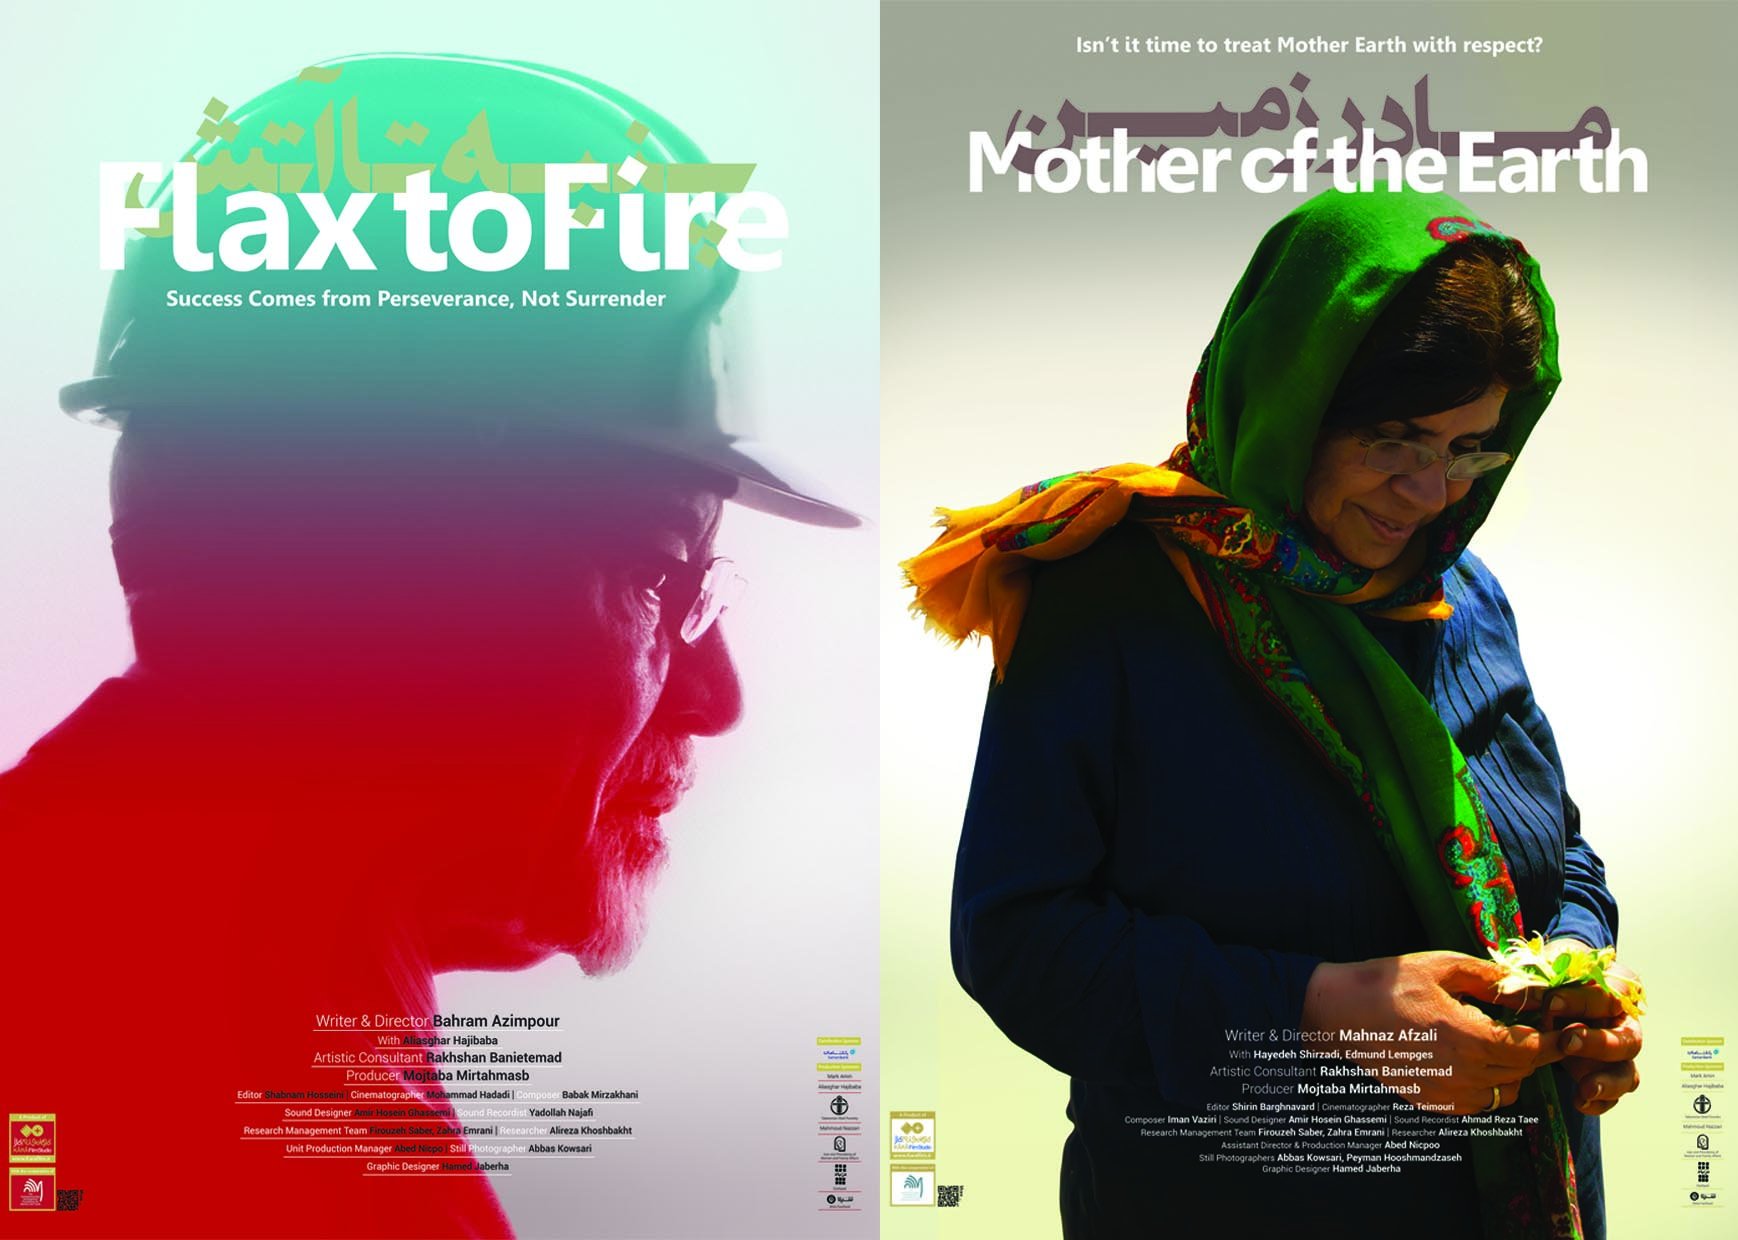 Two Documentaries “Mother of the Earth” and “Flax to Fire” to be Screened